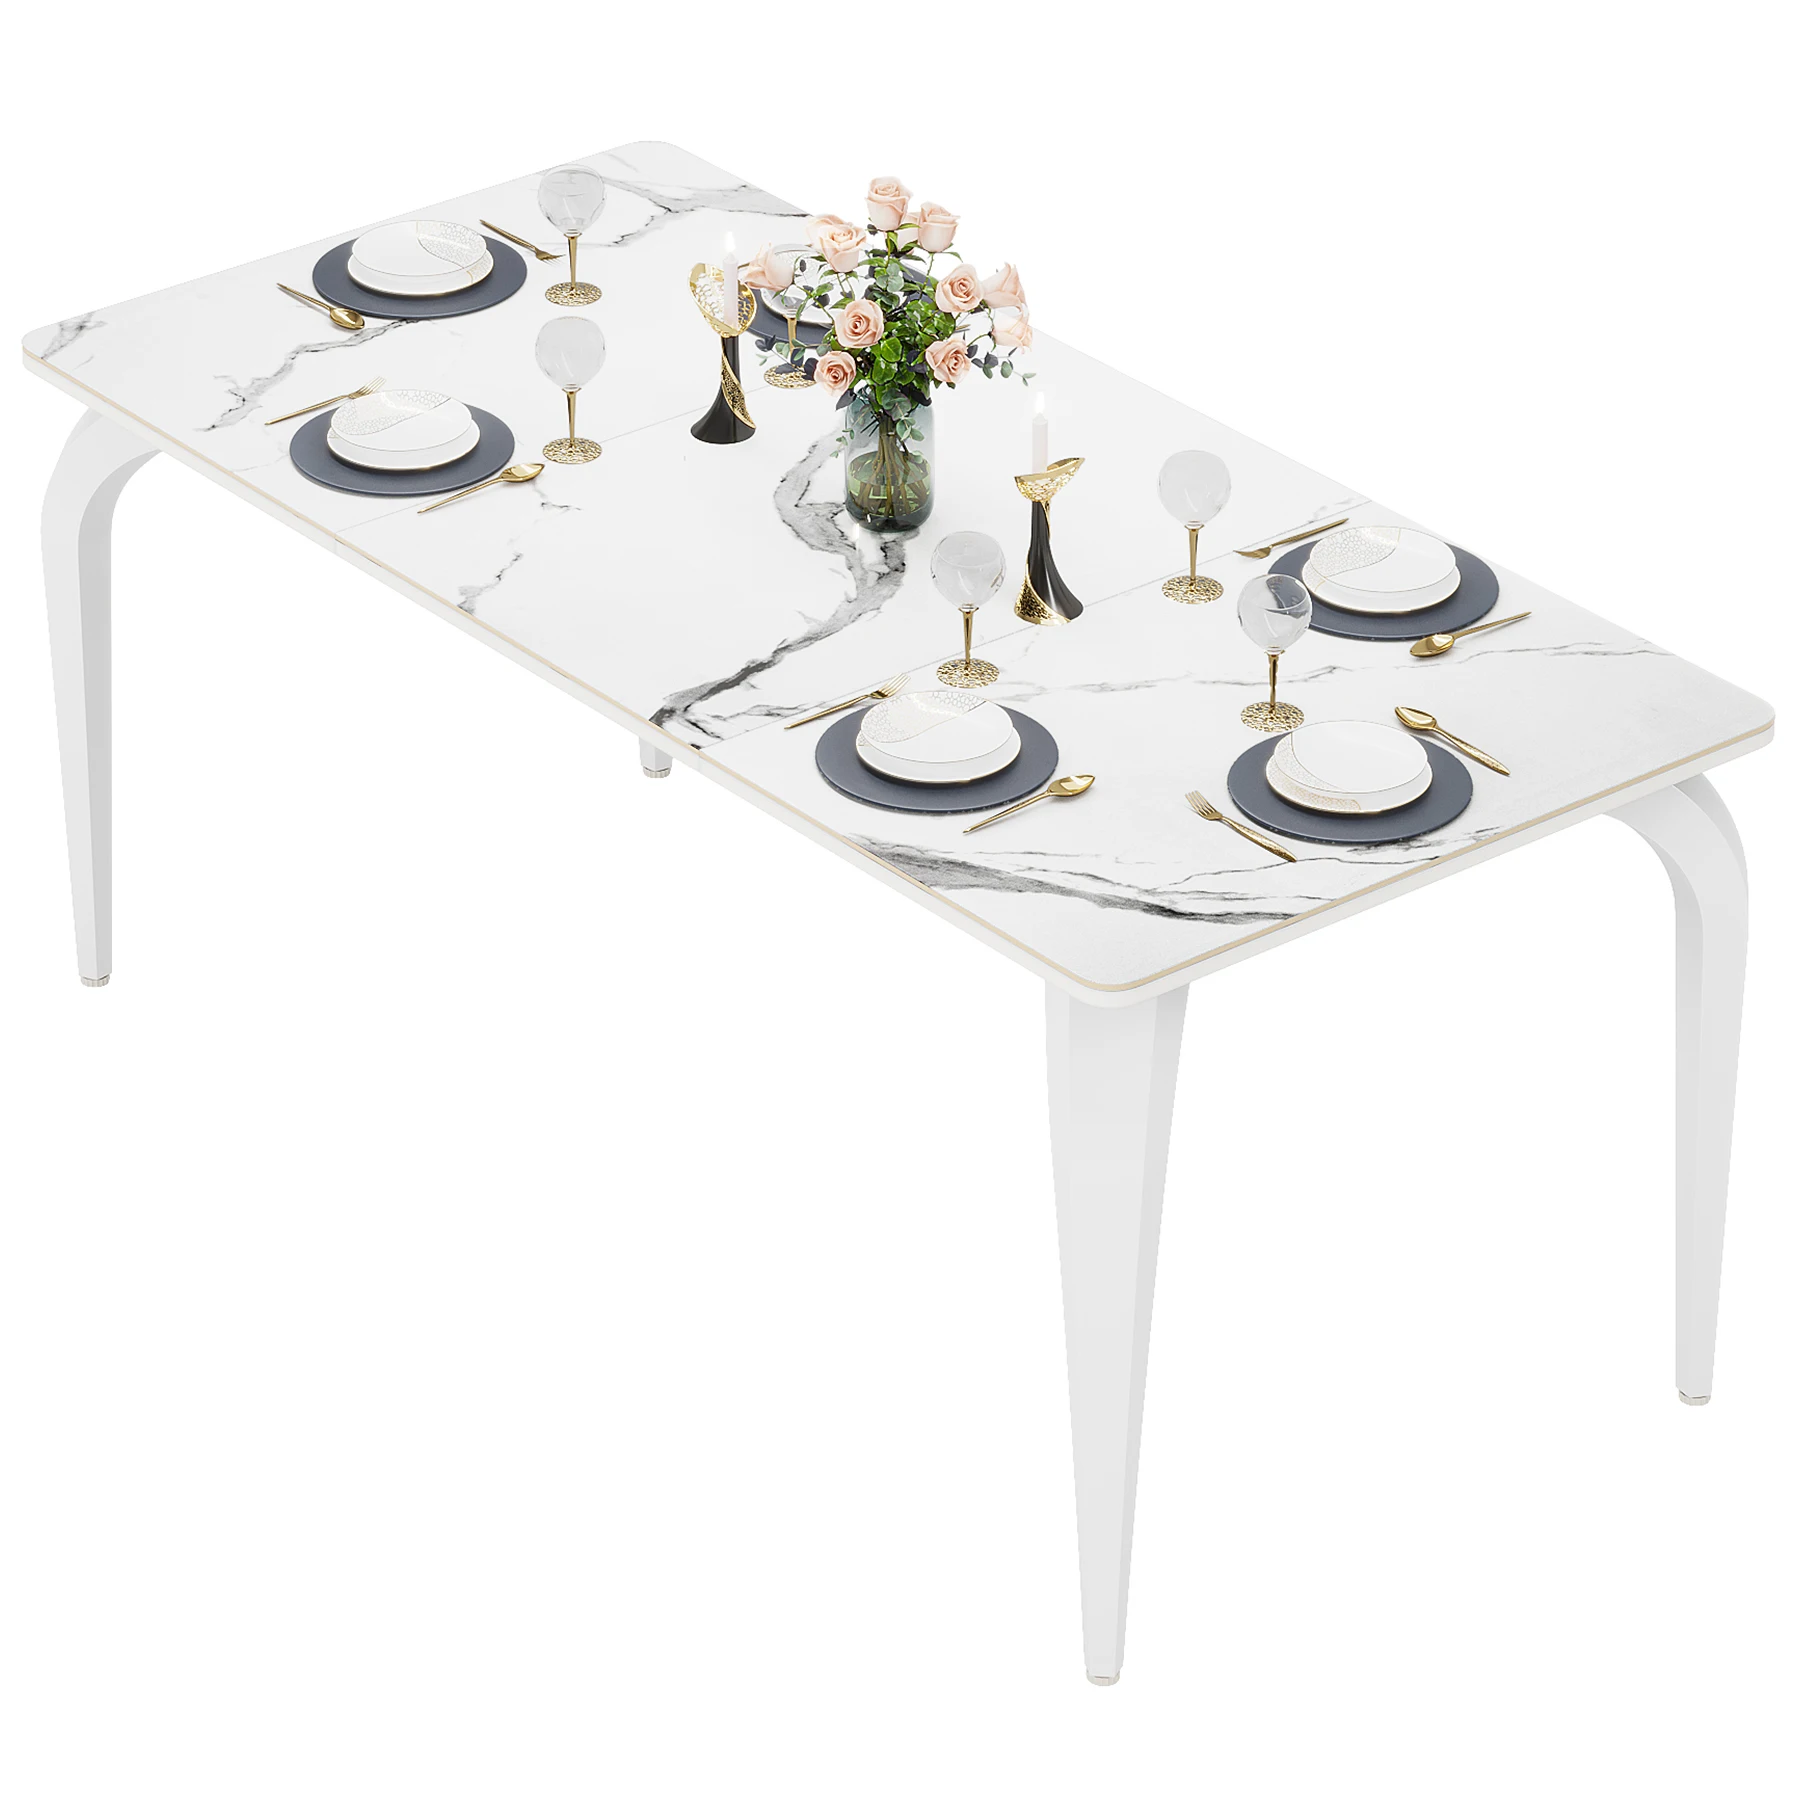 Custom Made In China Ultra Square Wood White Marble Modern Dining Table